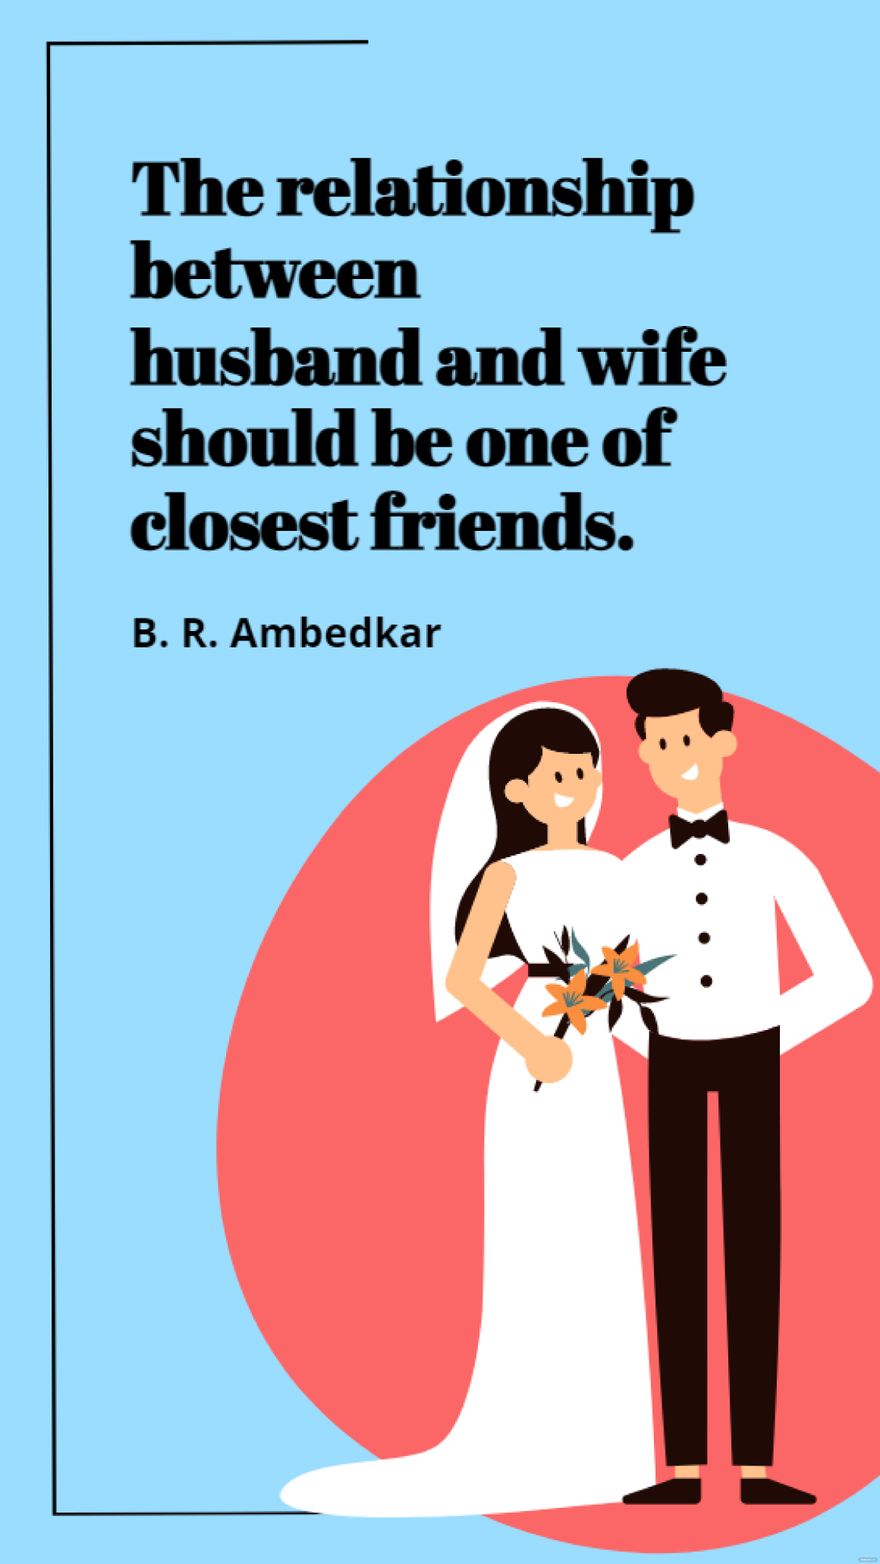 B. R. Ambedkar - The relationship between husband and wife should be one of closest friends. Template